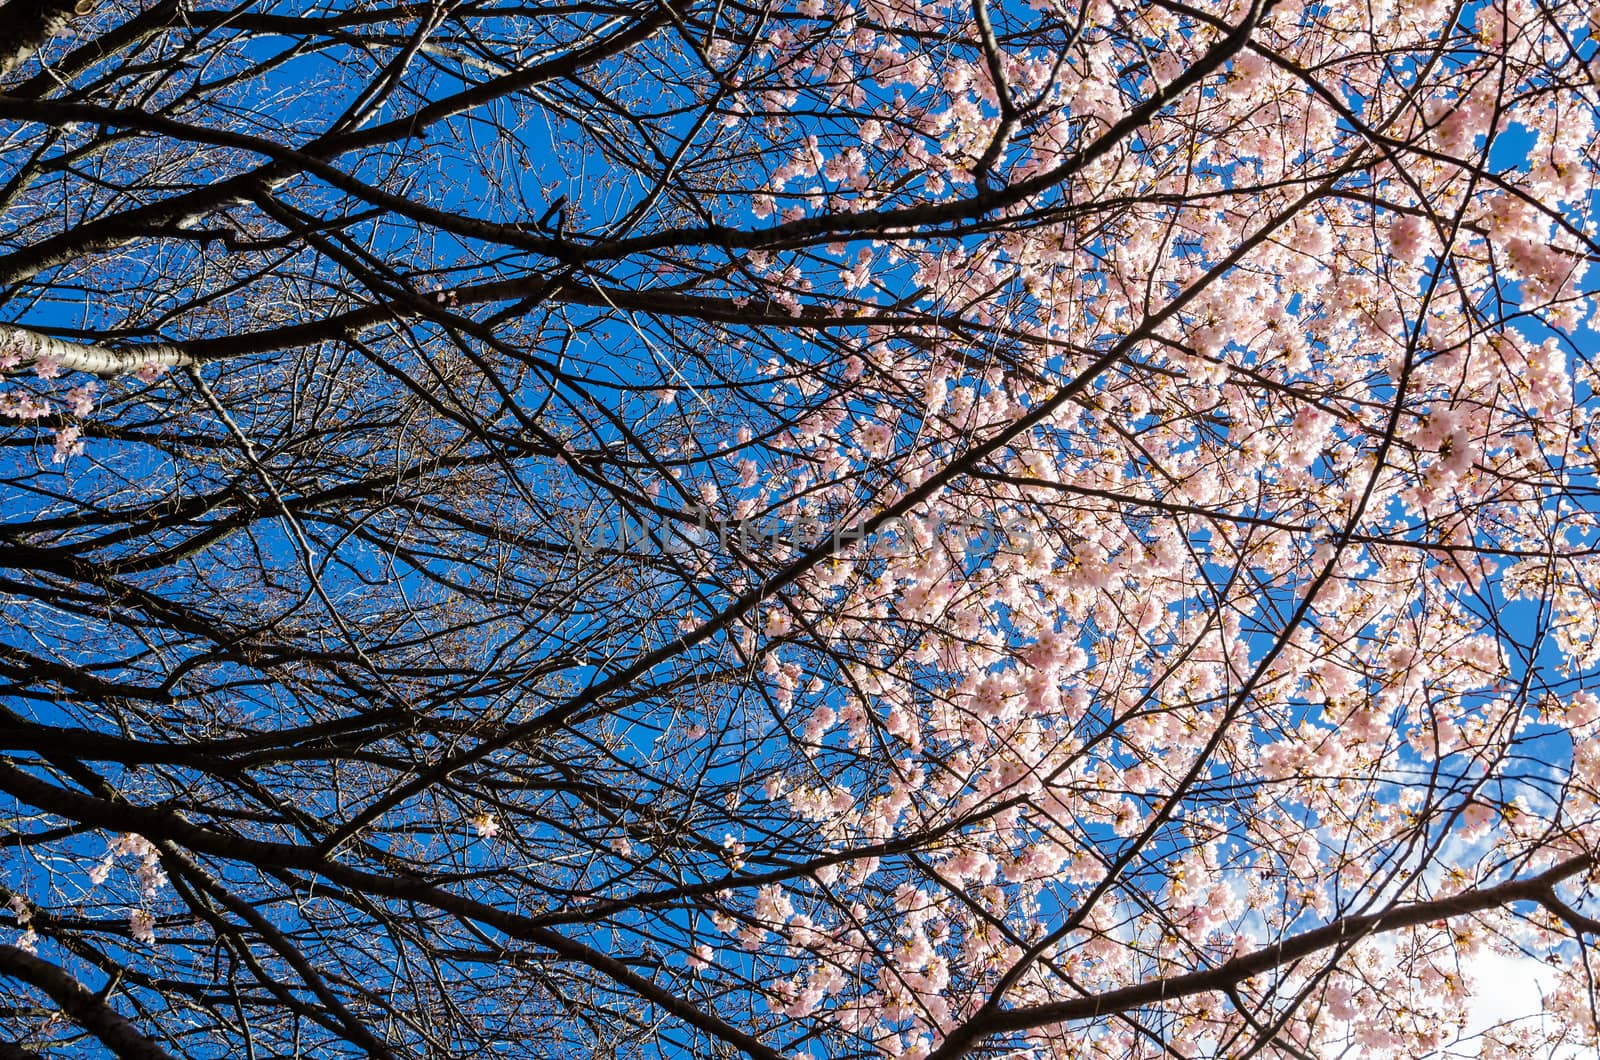 A cherry tree in full bloom in half of the frame and the black branches on the other half. Captured in Central Park in a sunny day with blue sky, New York, USA